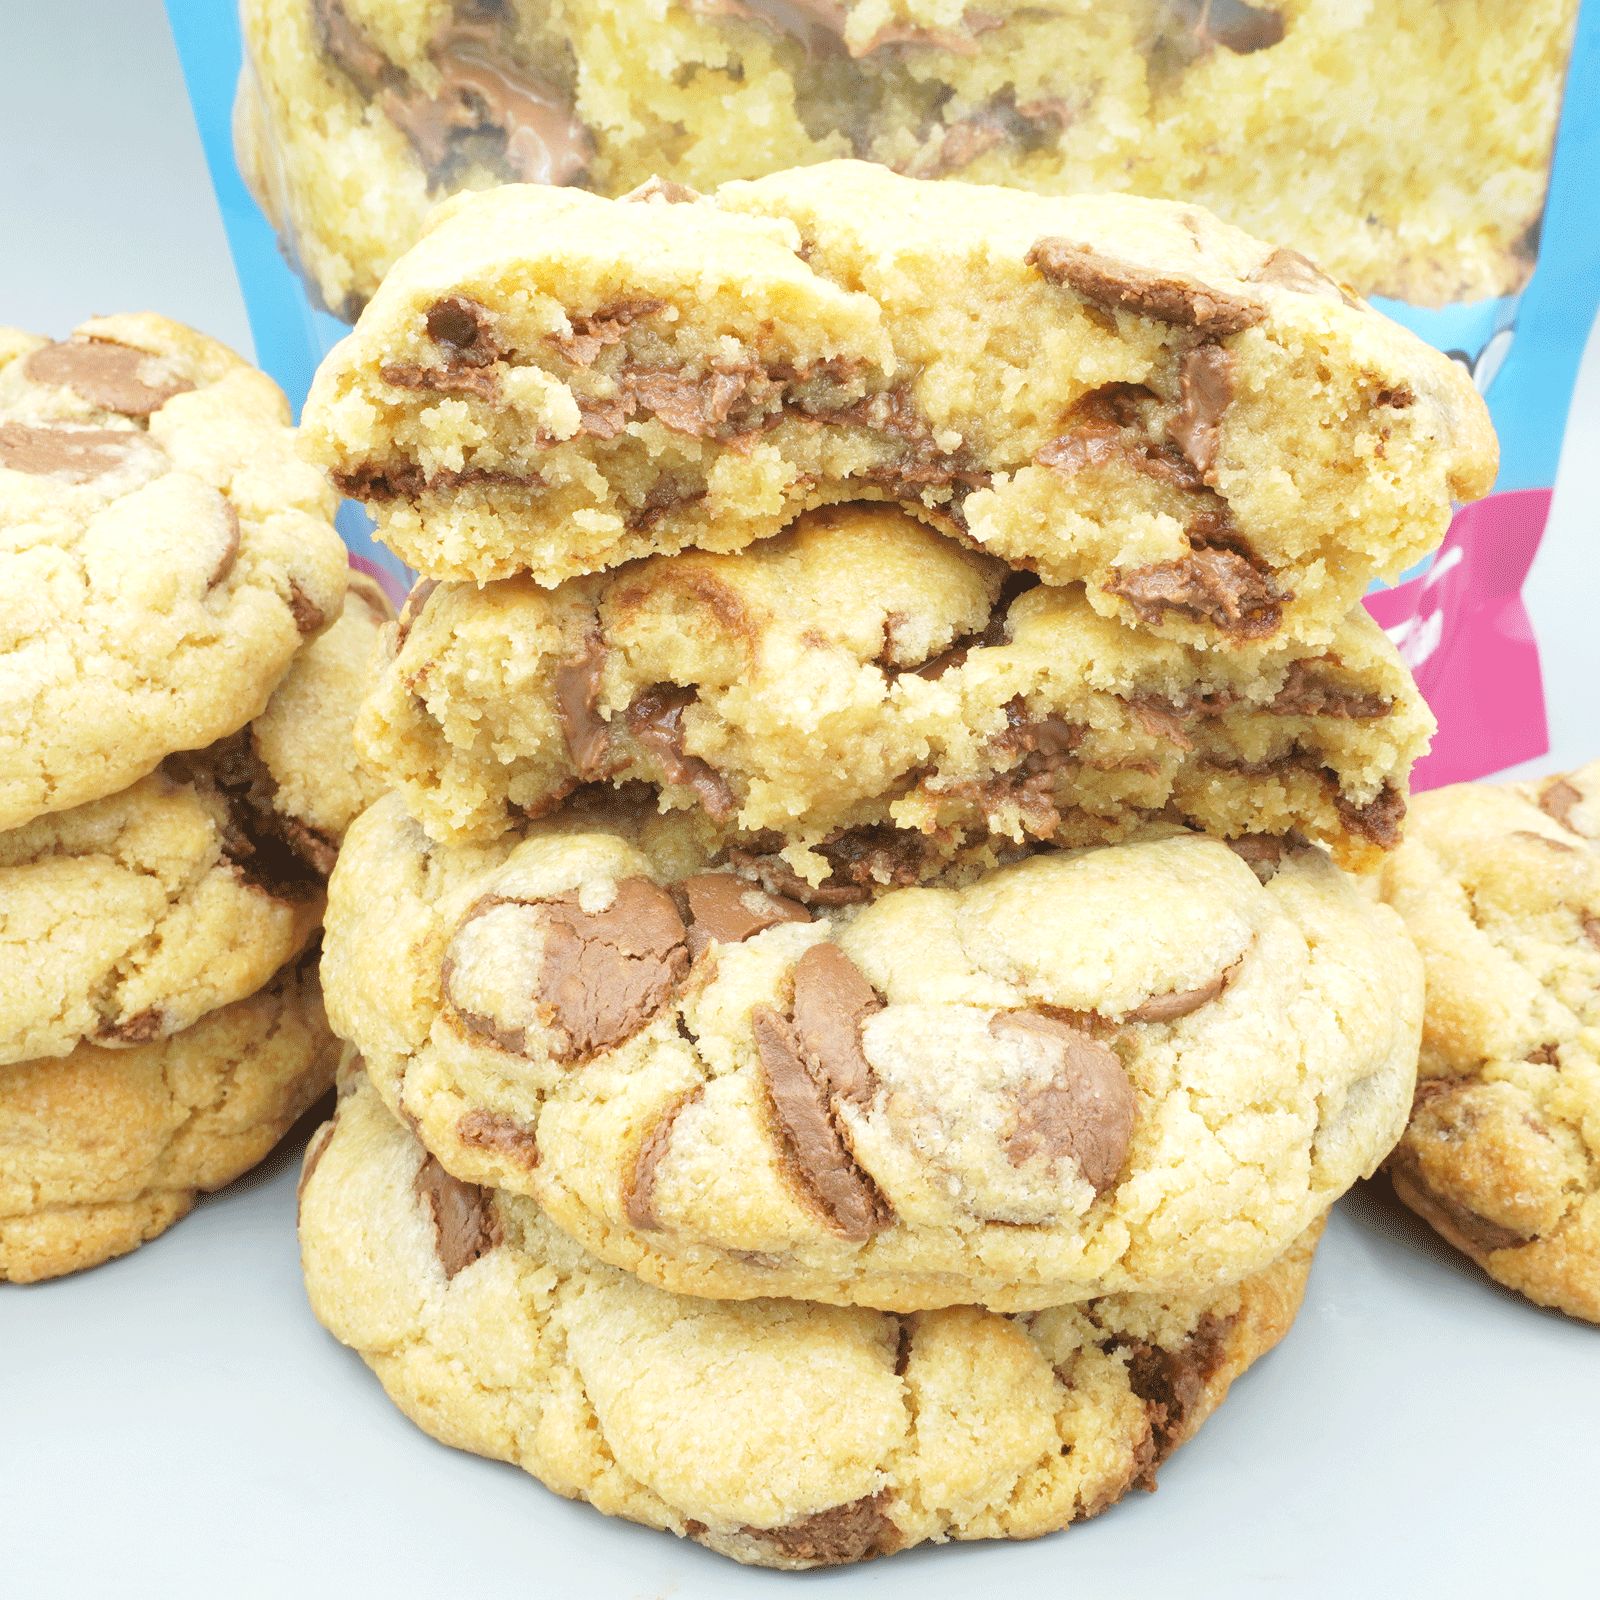 Chocolate Chip Bake At Home Cookies